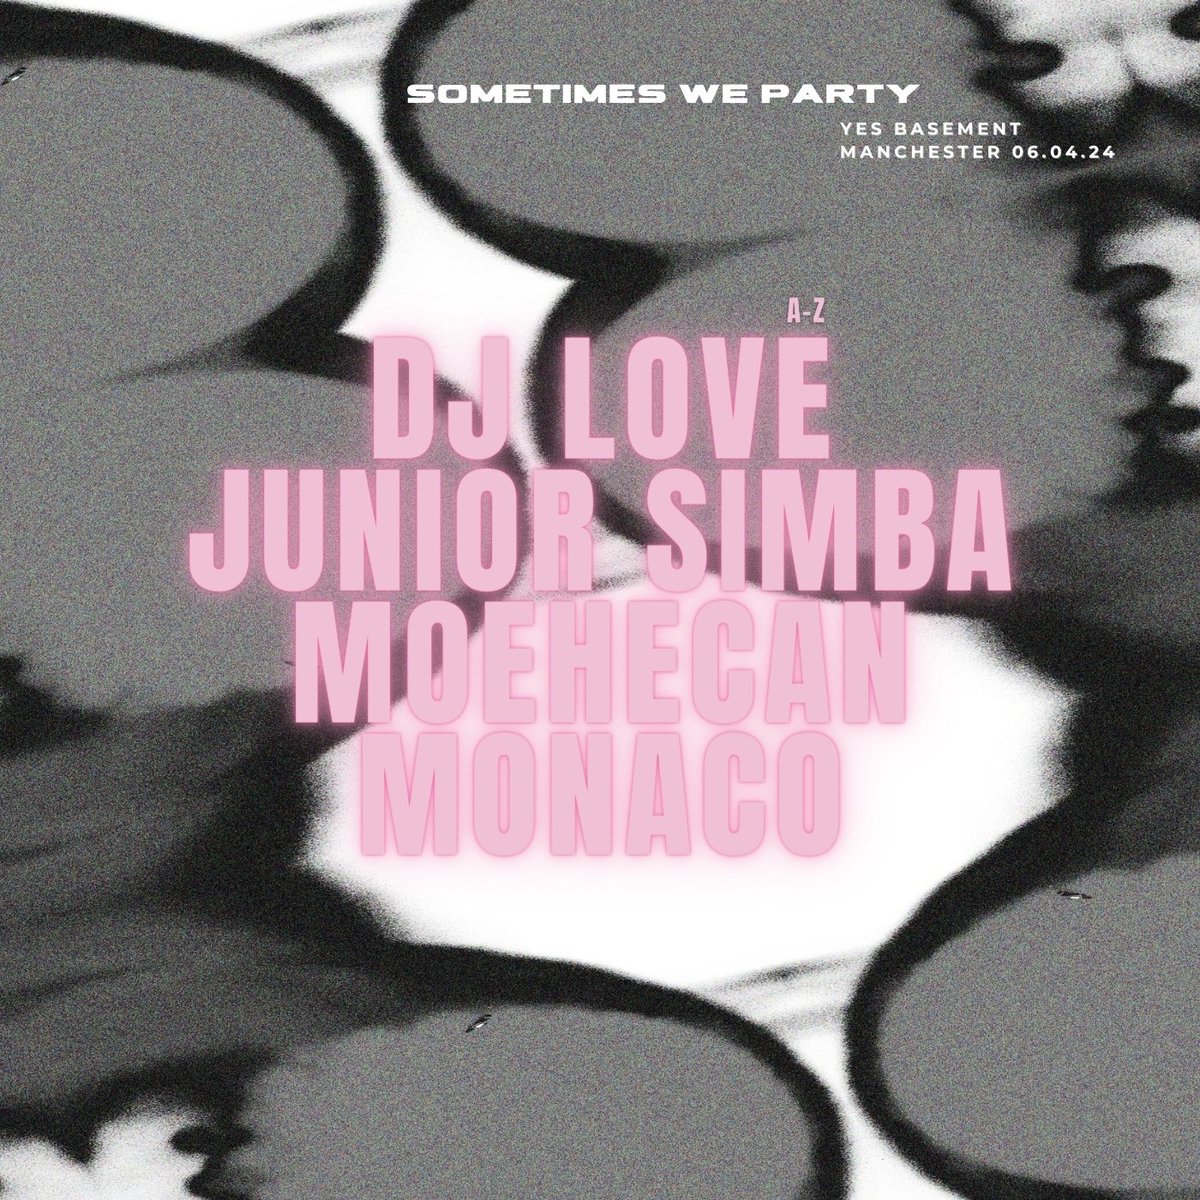 This Saturday in The Basement... SOMETIMES WE PARTY. @itsjuniorsimba is bringing the heat to The Basement for @DJLoveUK YES debut along with Moehecan and Monaco Don't miss out. Tickets here -> seetickets.com/event/sometime…